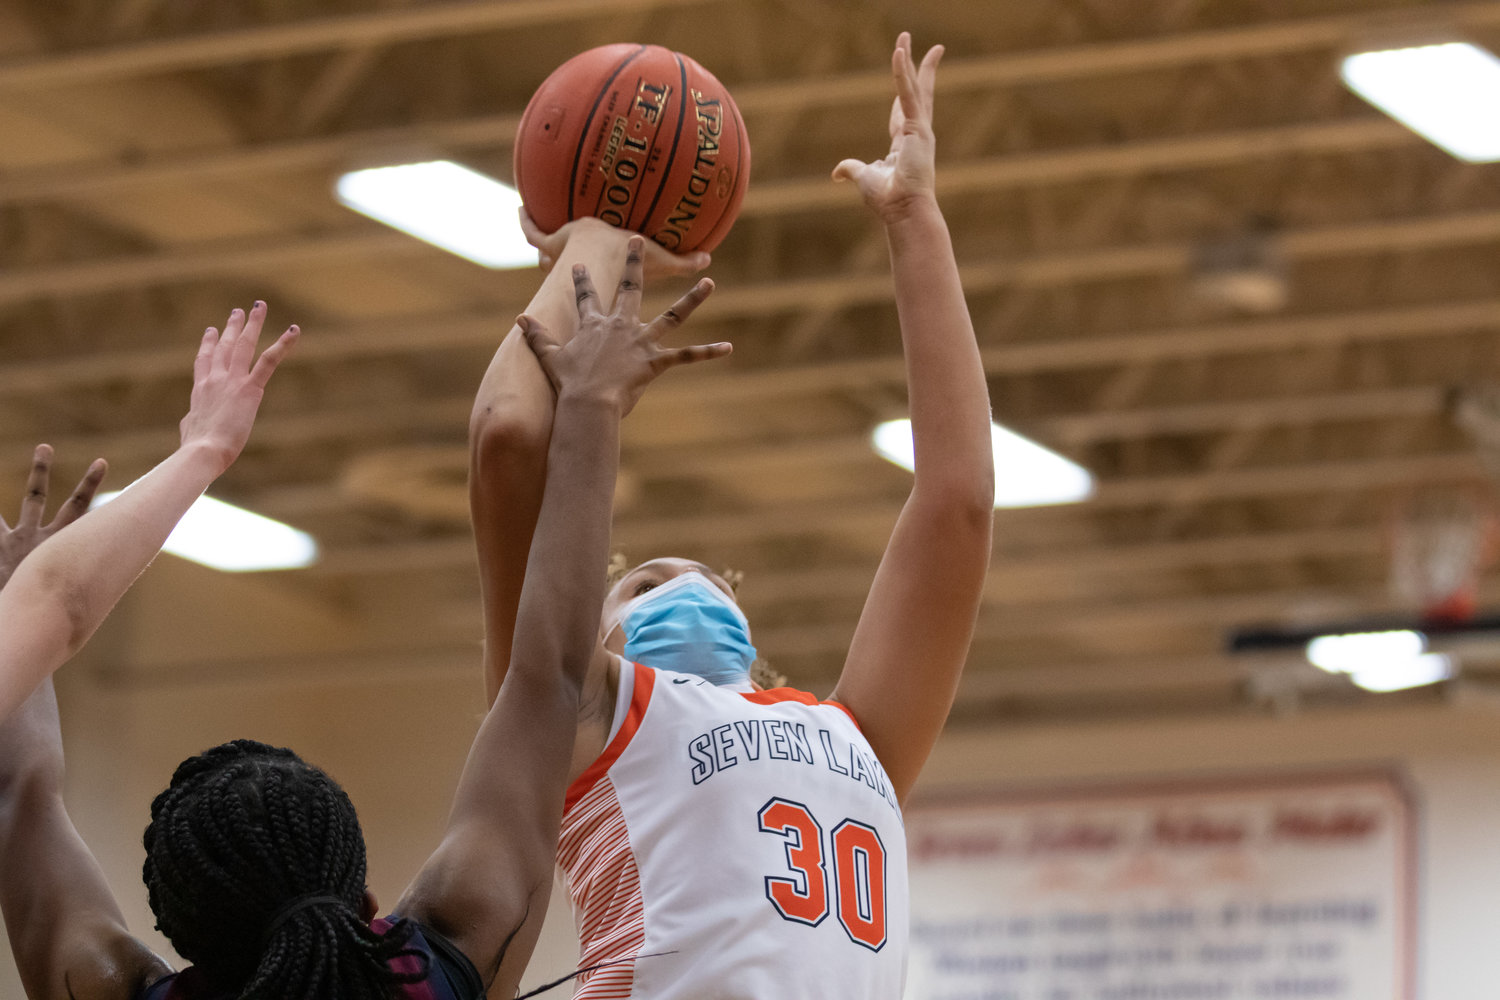 Seven Lakes freshman forward Justice Carlton goes up for a shot during a game against Tompkins on Tuesday, Dec. 29, at Seven Lakes High.